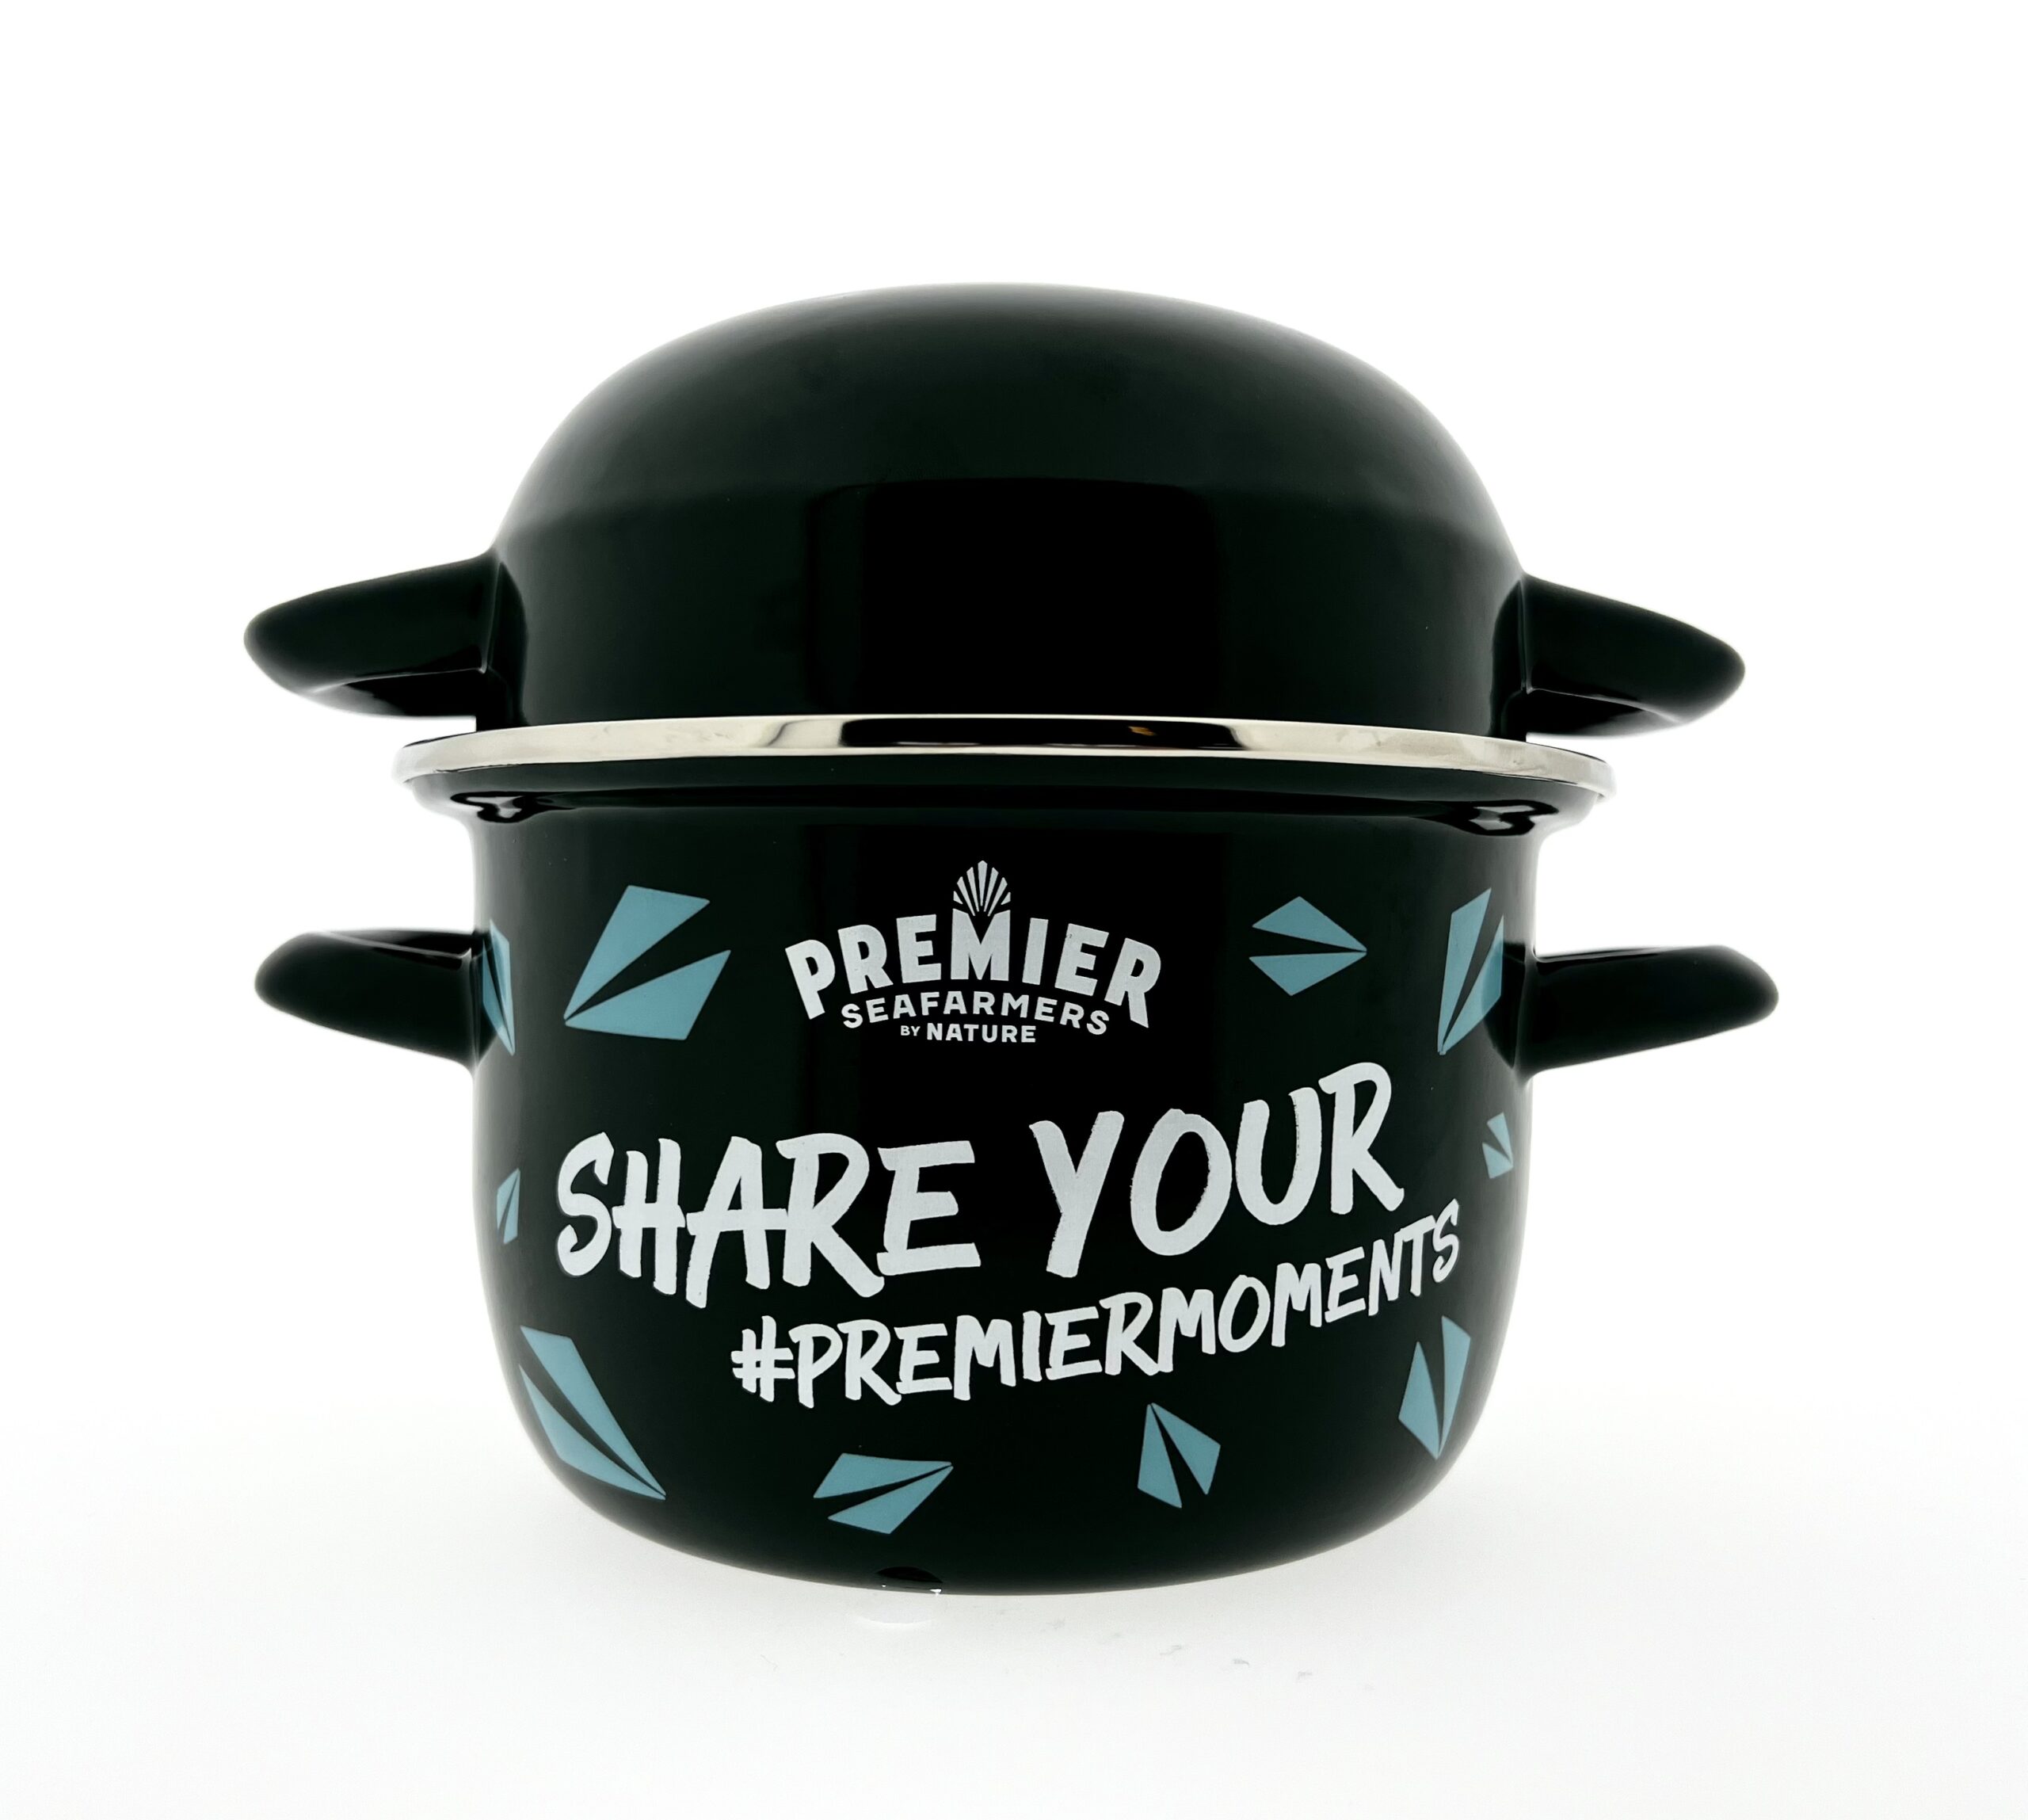 Mosselpan - Share your #premiermoments